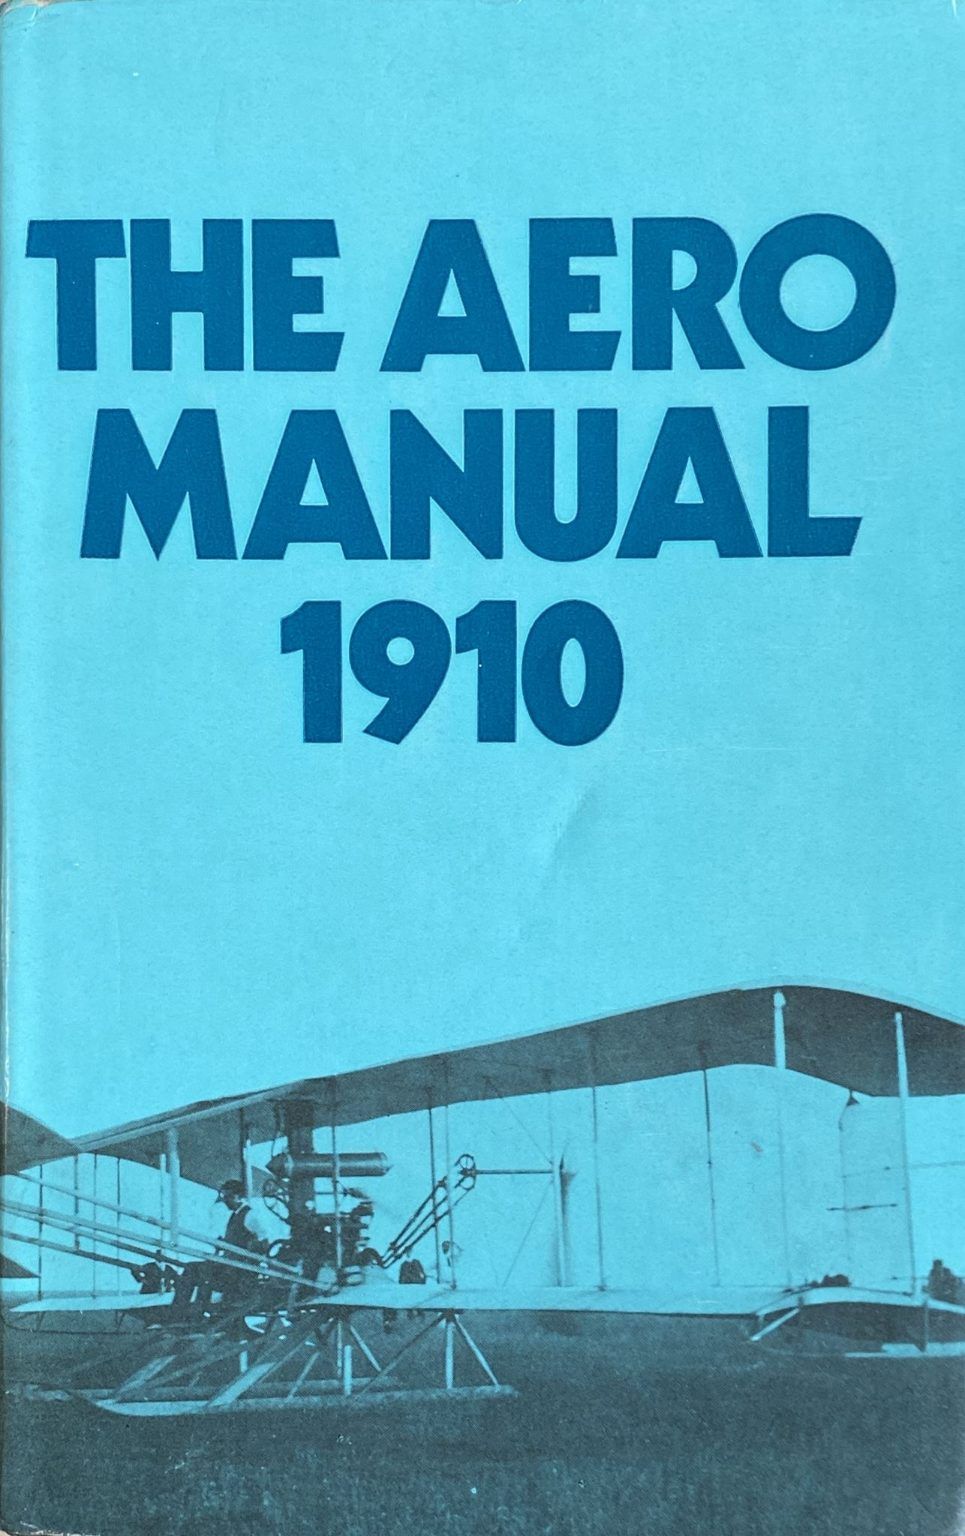 THE AERO MANUAL 1910: All About Mechanical Flight